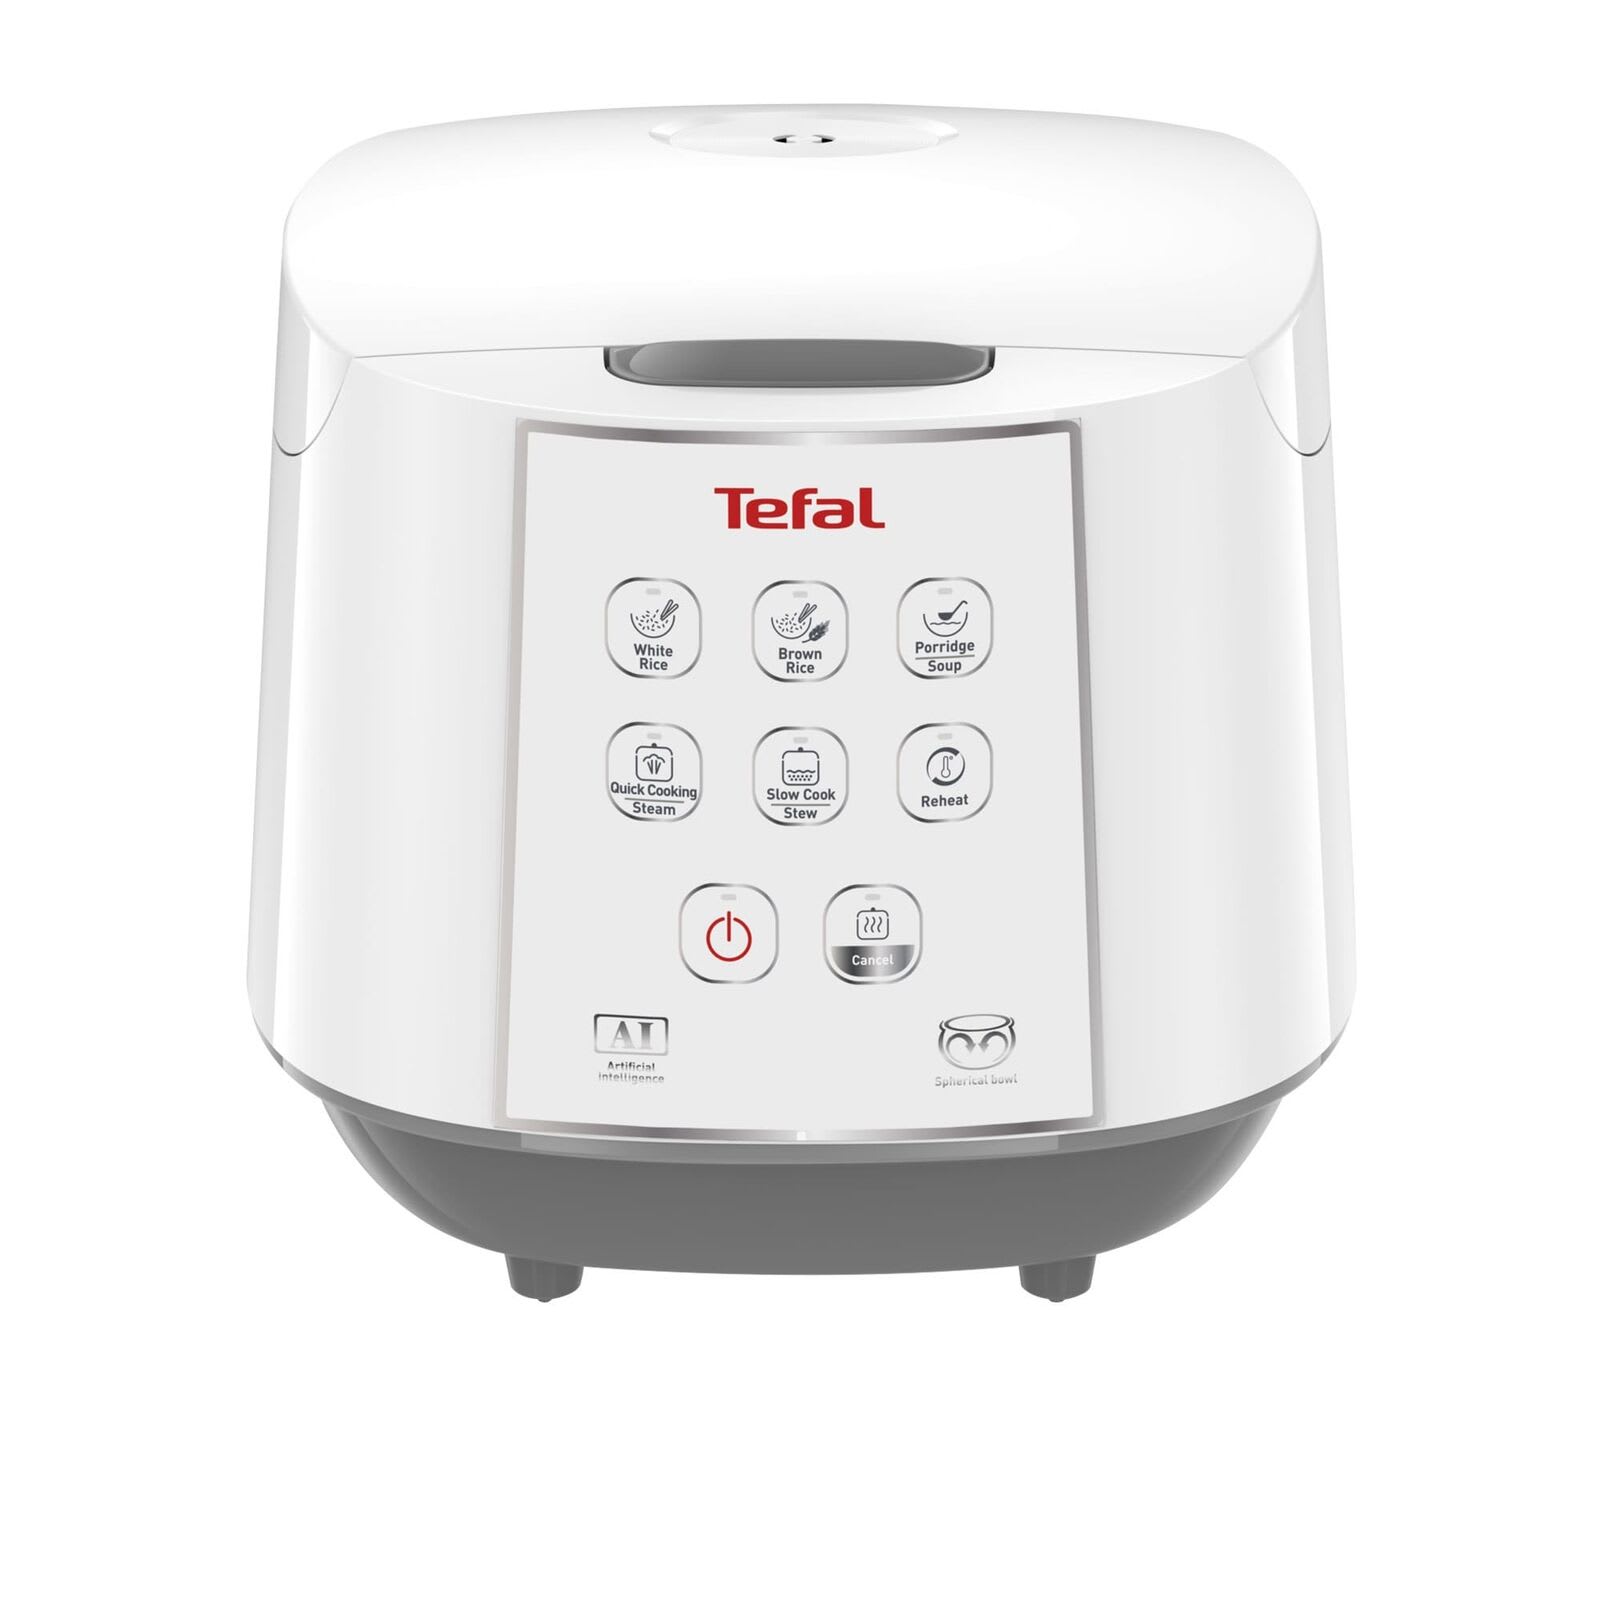 TEFAL Rice and Slow Cooker, White, RK732